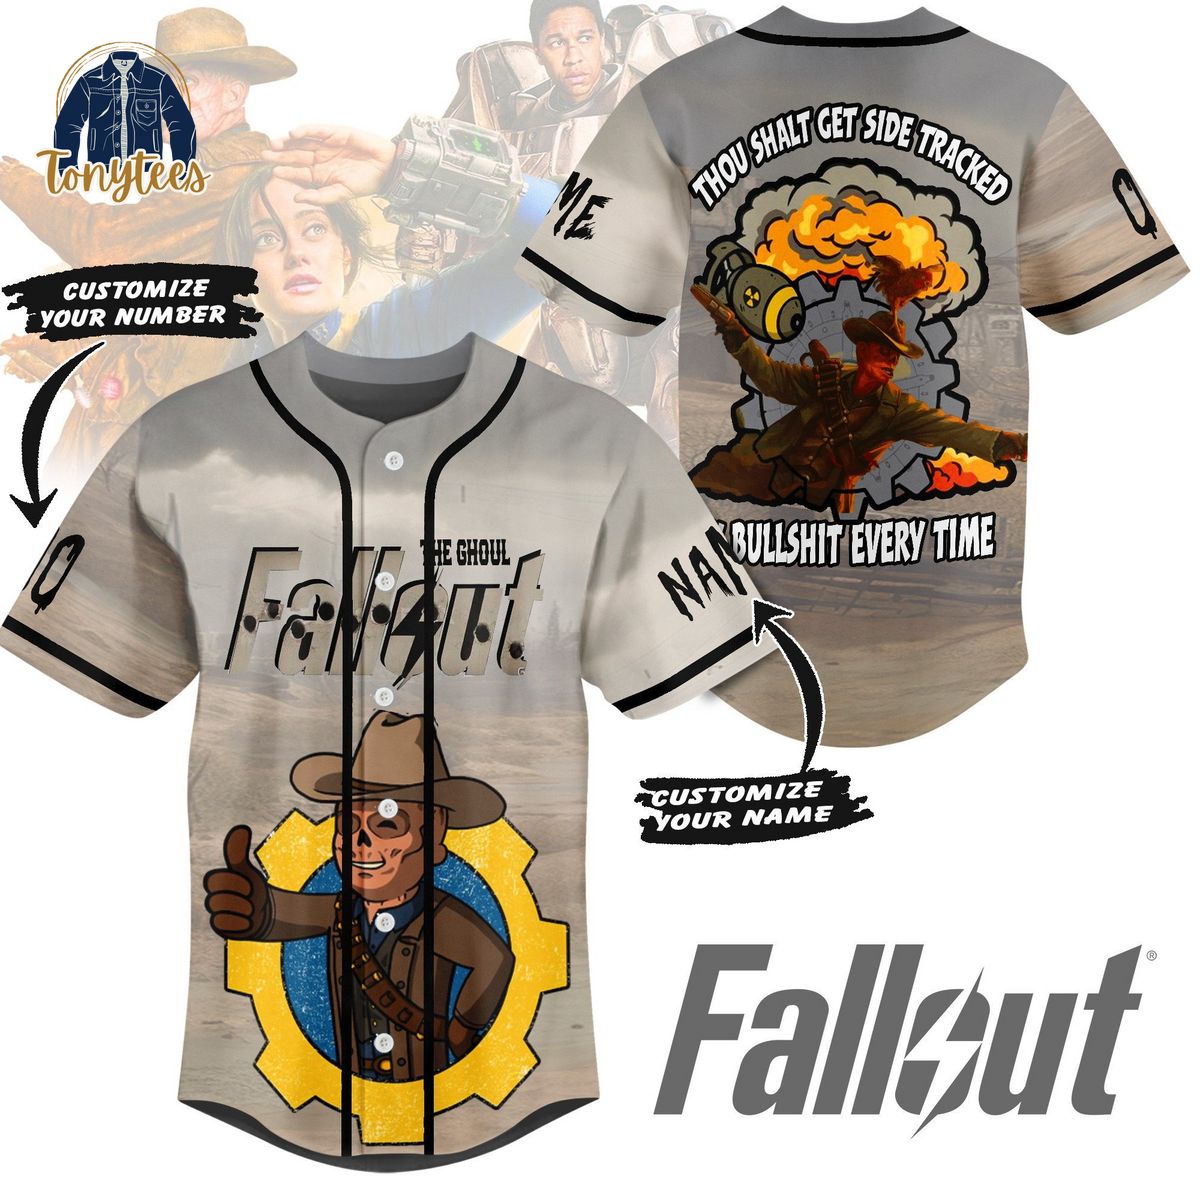 Personalized Fallout Thou Shalt Get Side Tracked By Bullshit Every Time Baseball Jersey